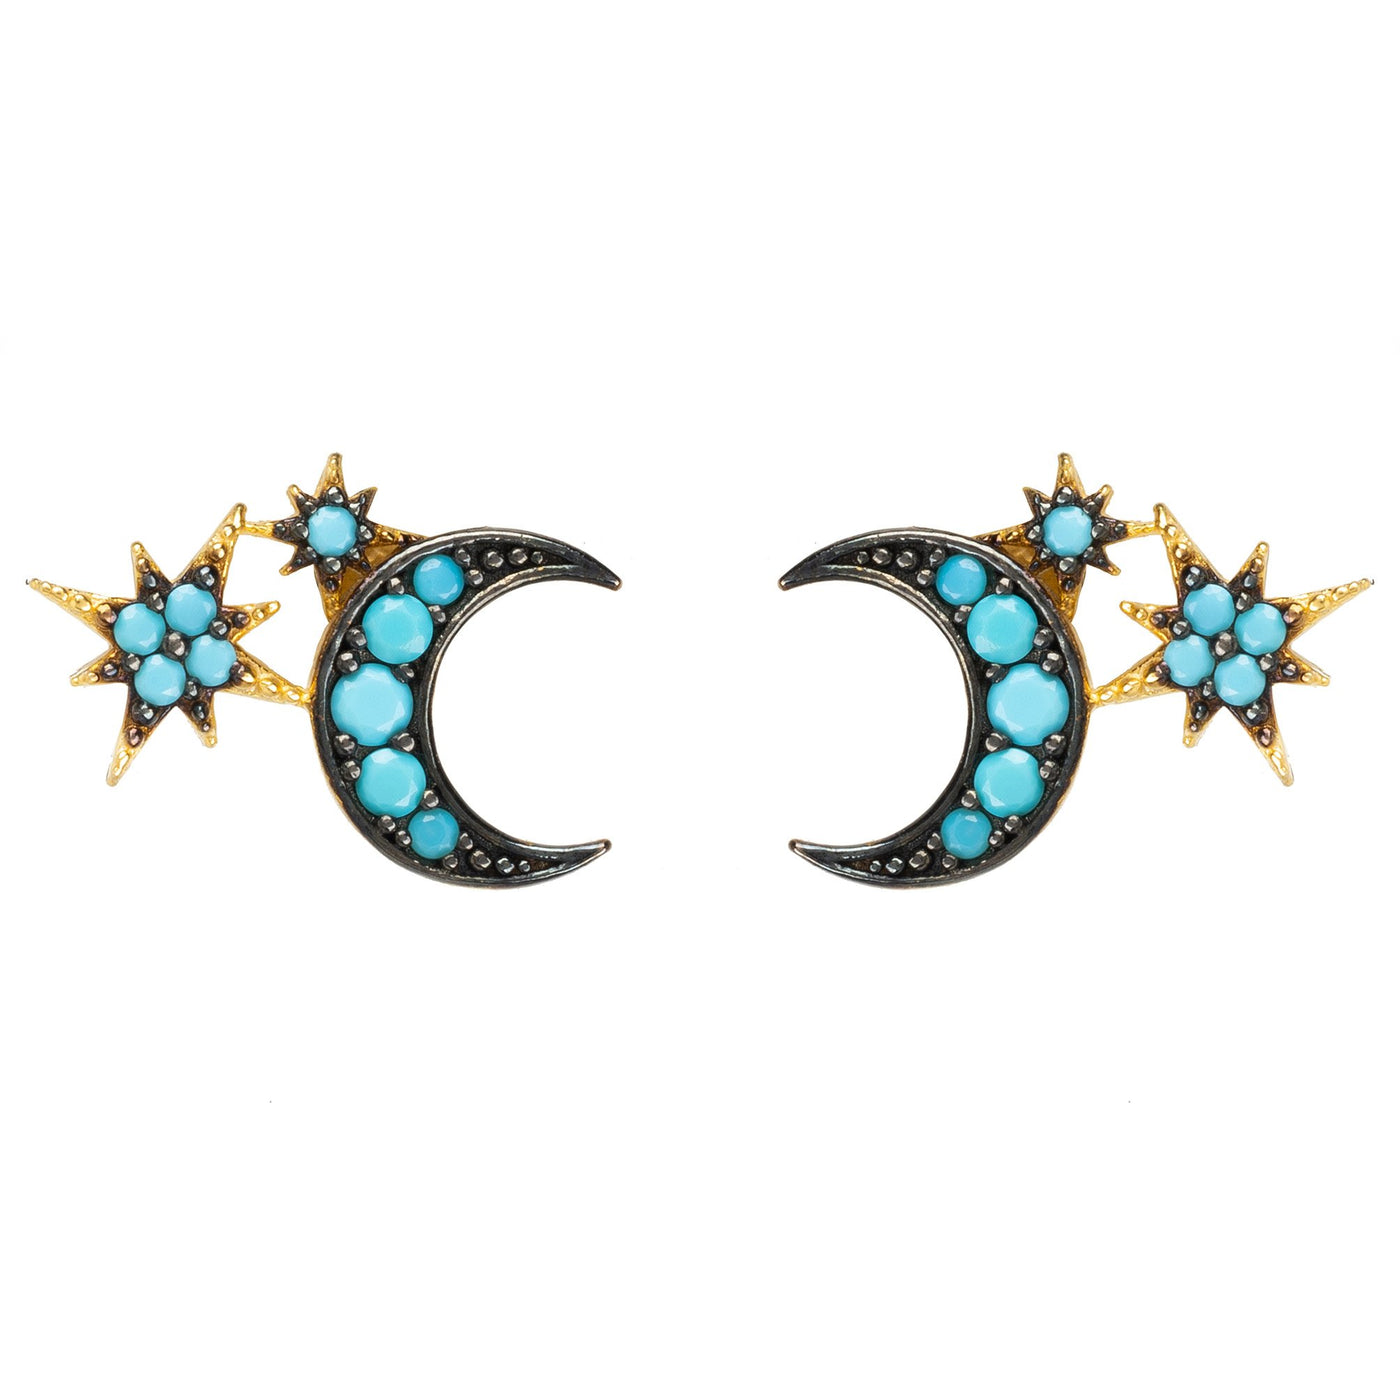 Stud earrings - moon and stars - 22 carat gold plated - Turquoise